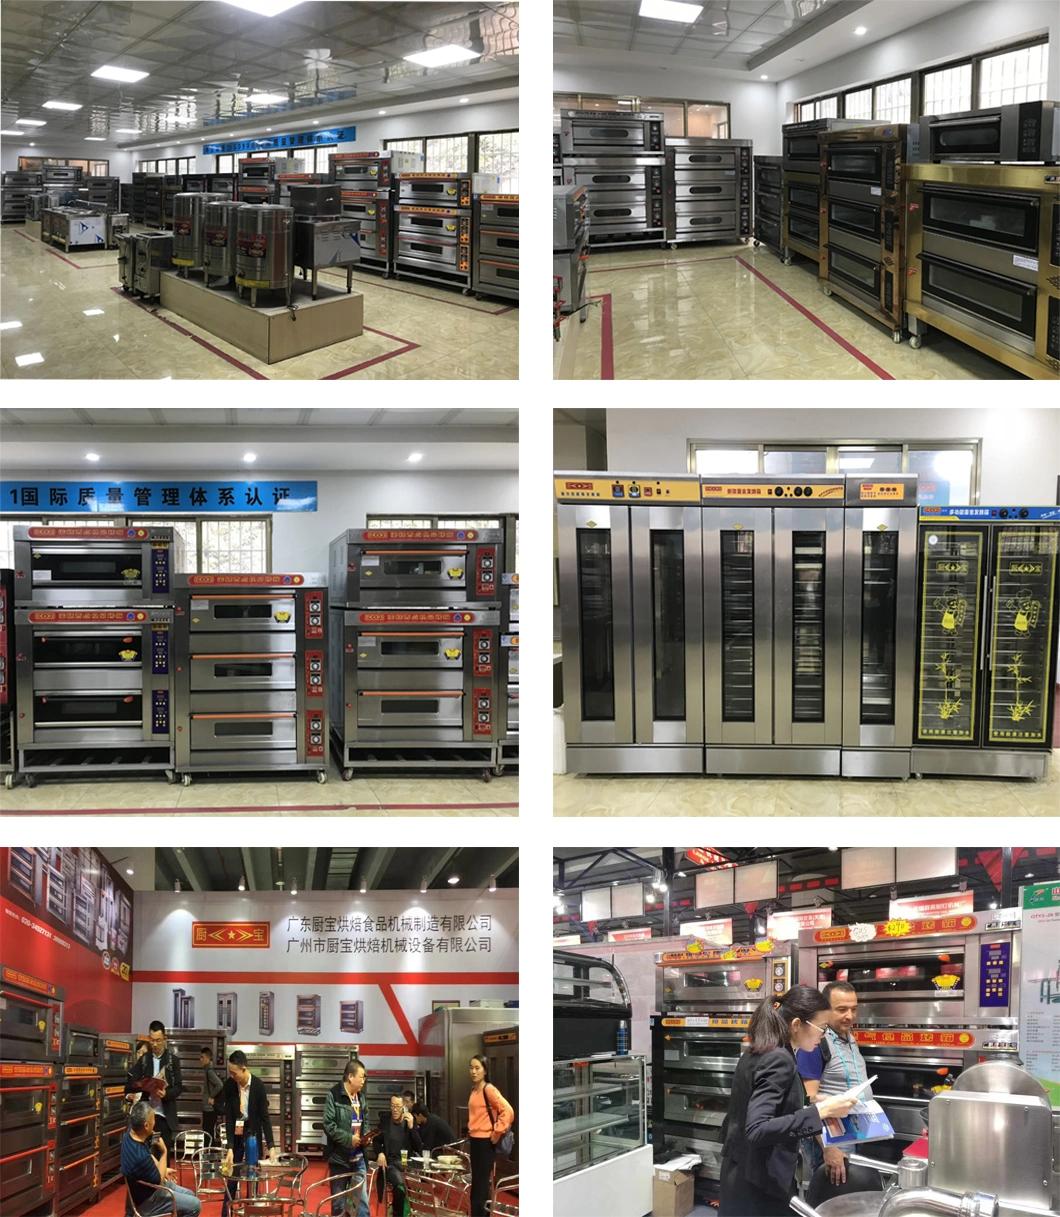 3 Deck 6 Trays Electric Pizza Oven for Commercial Kitchen Baking Equipment Bakery Machine Food Machinery